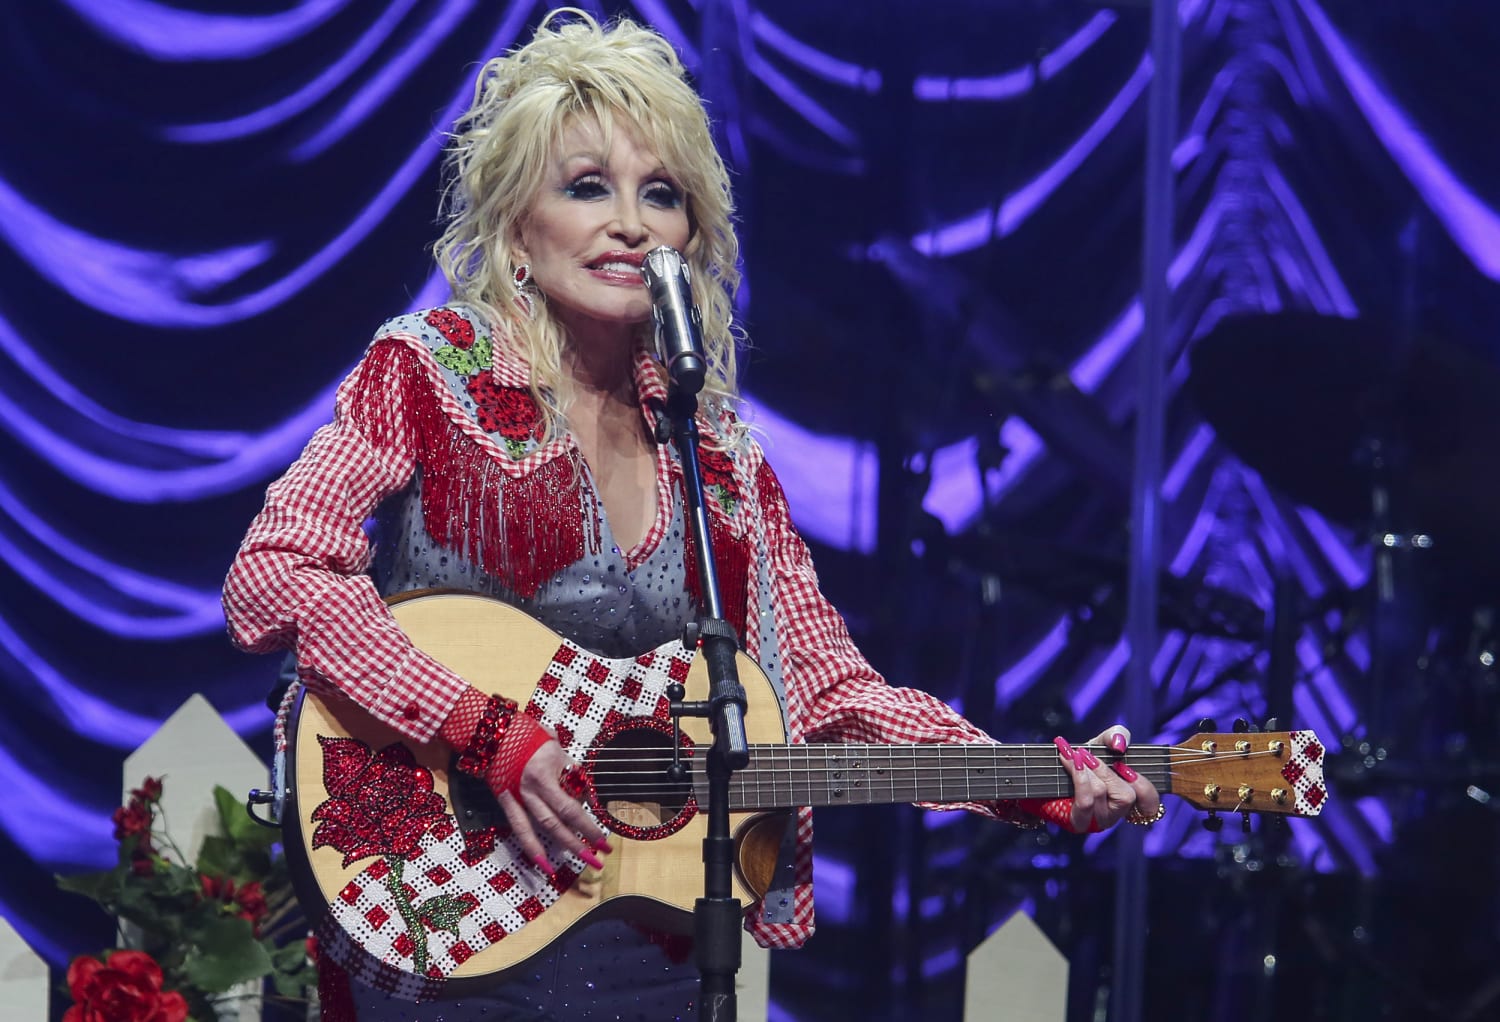 Dolly Parton Releases Her Powerful Rendition of Rock Classic “Let It Be”